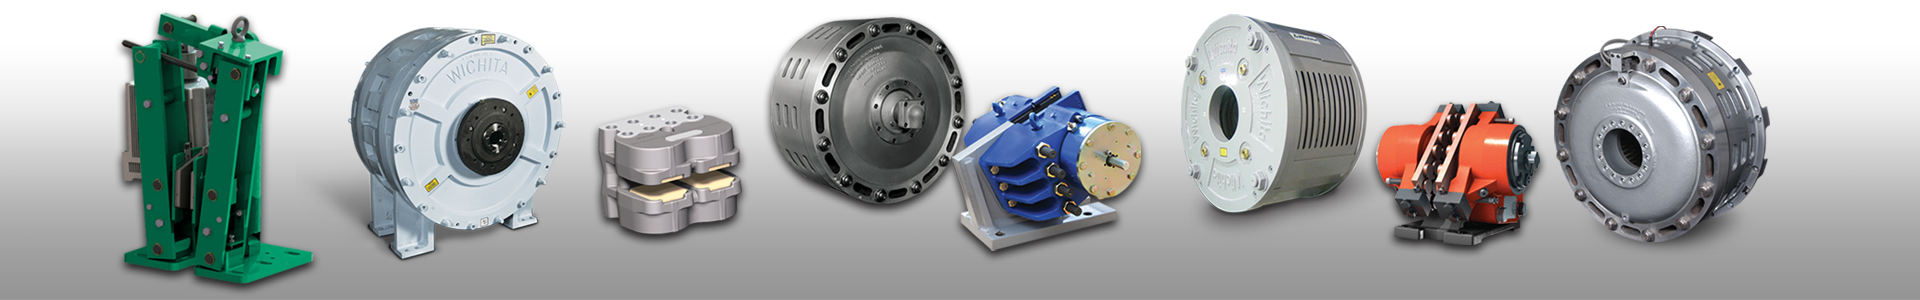 Heavy Duty Clutches and Brakes